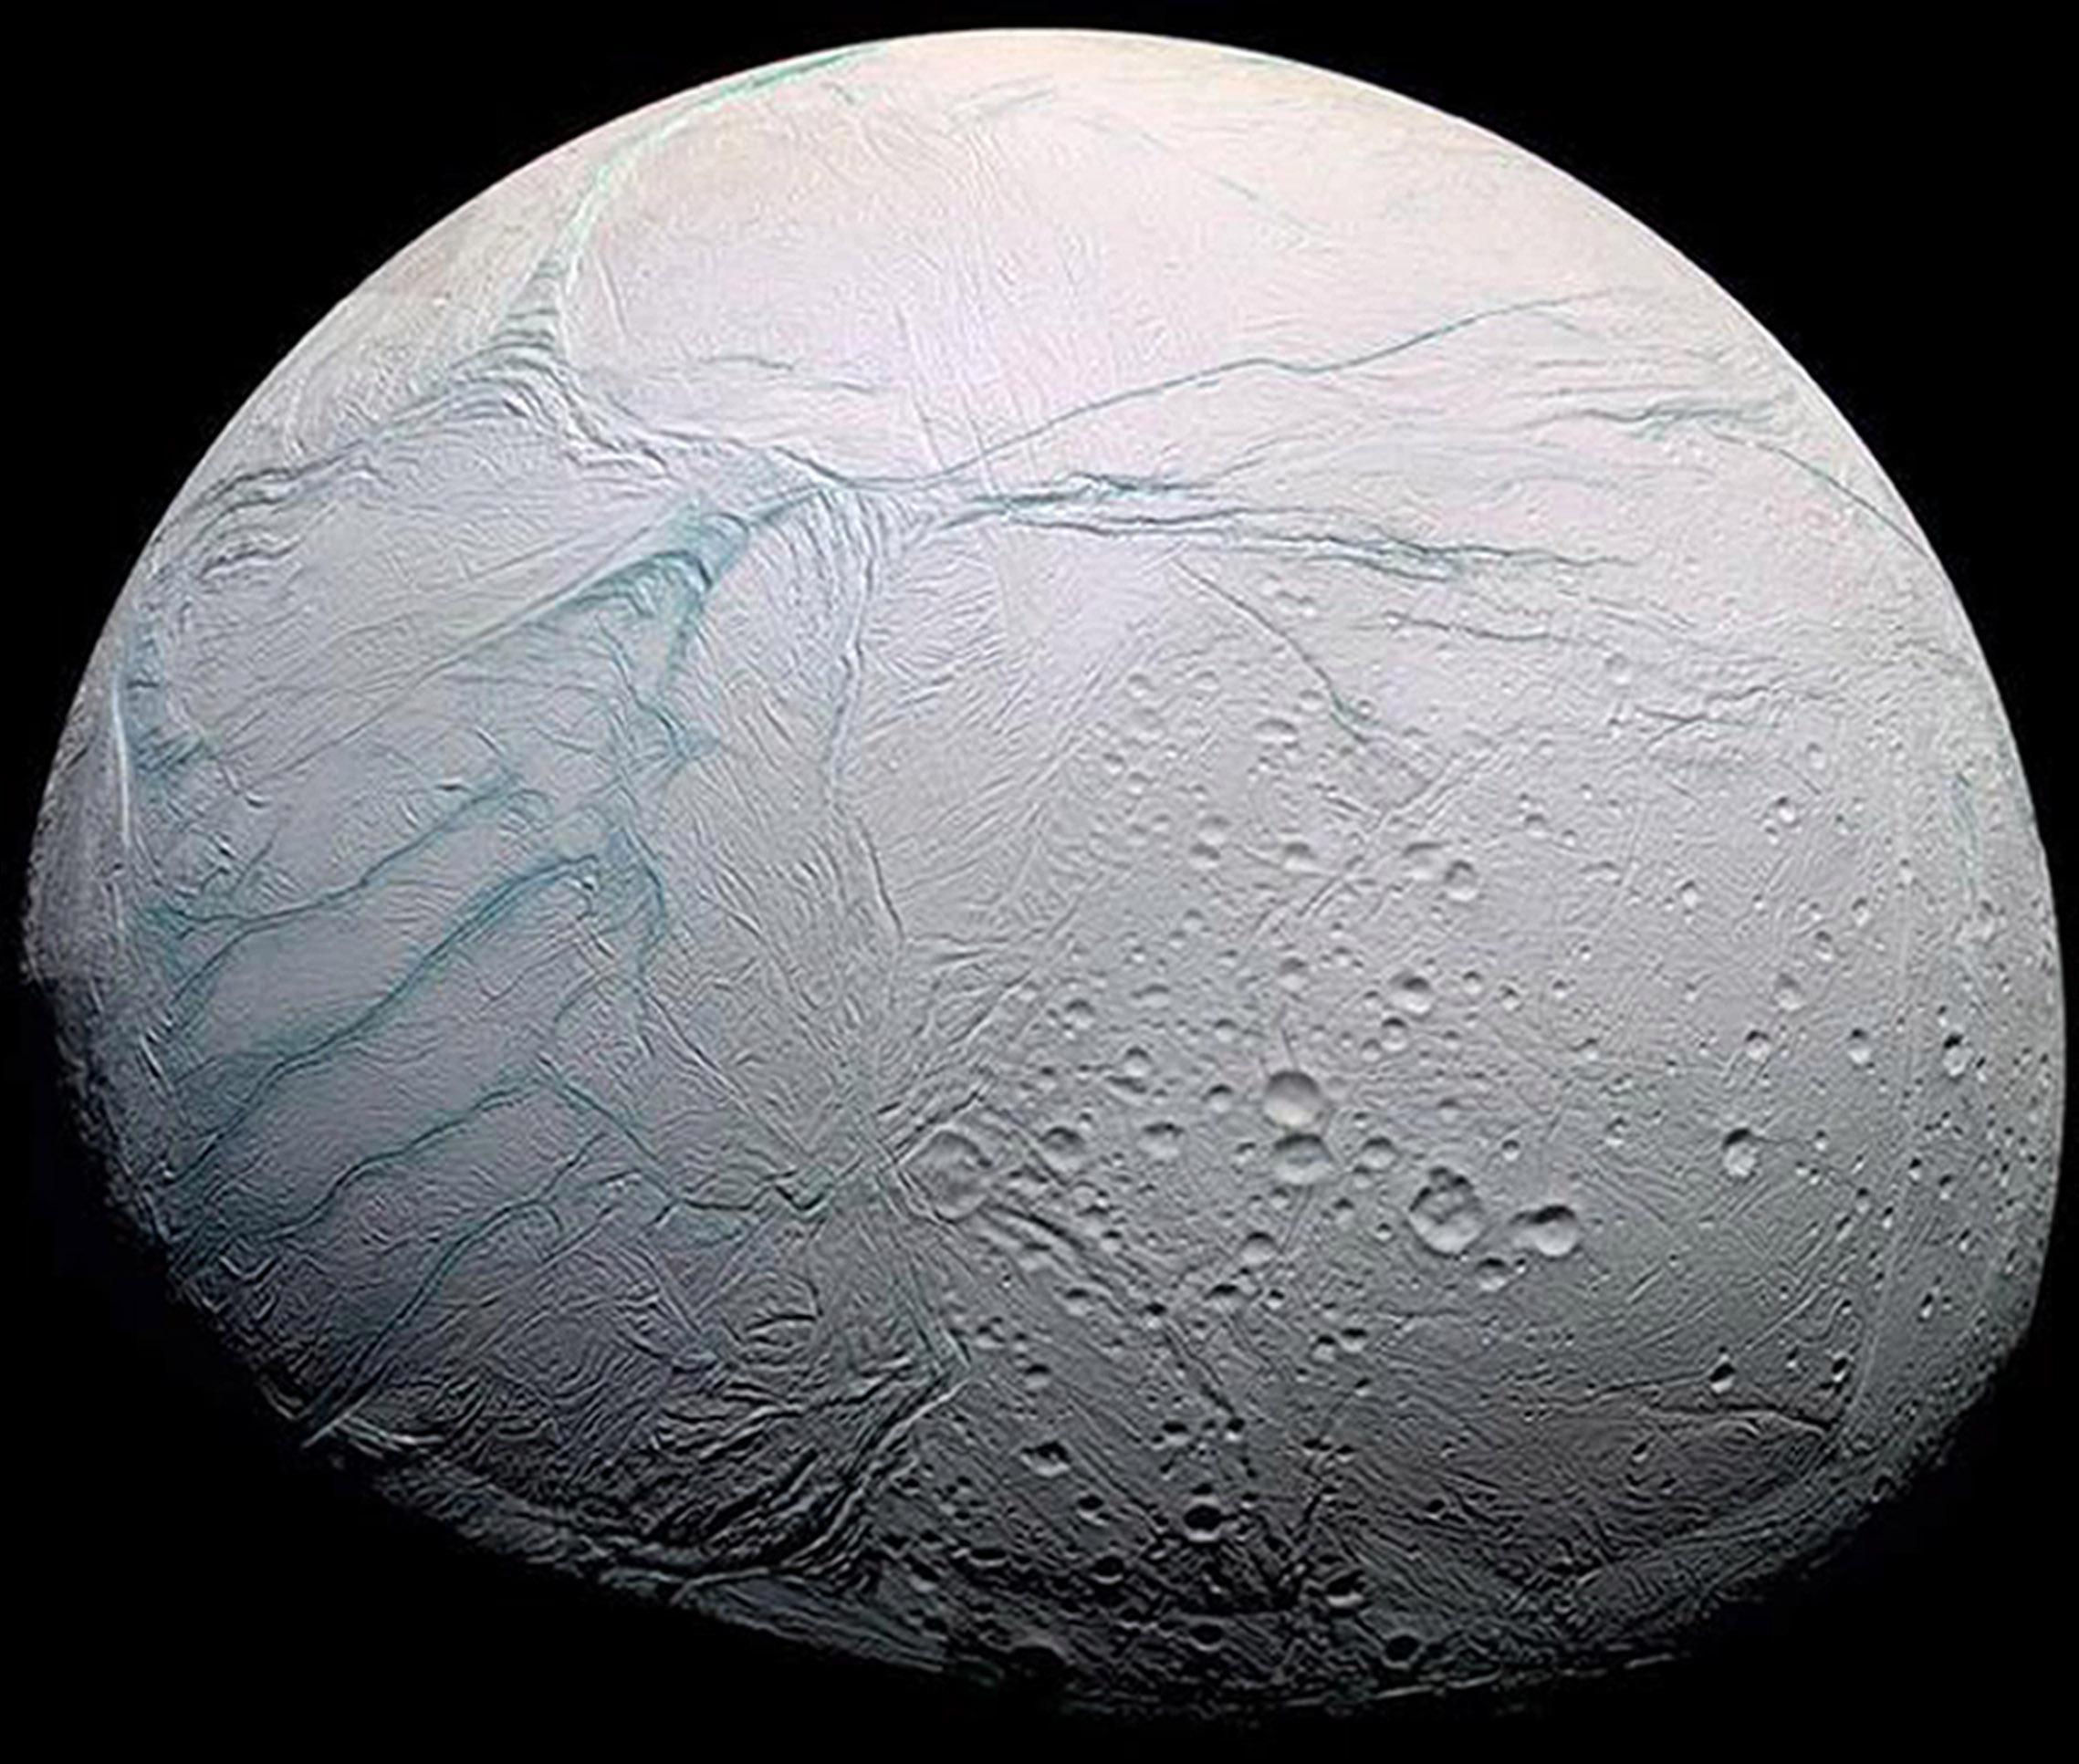 The south polar region of one of Saturn’s moons, Enceladus could be home to alien life